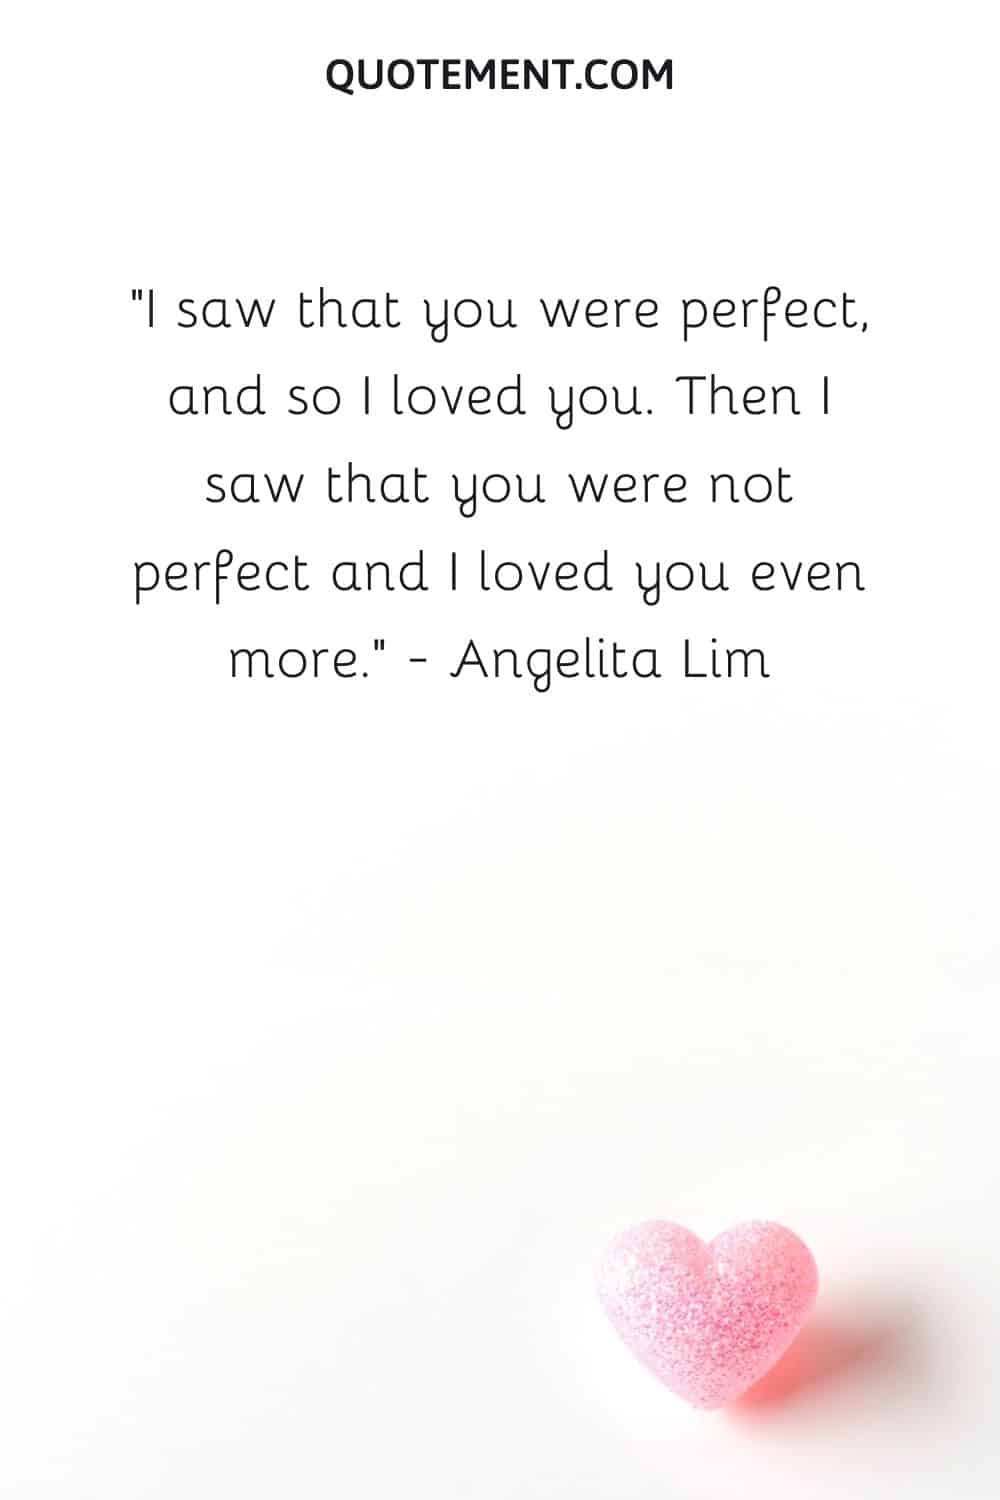 I saw that you were perfect, and so I loved you.